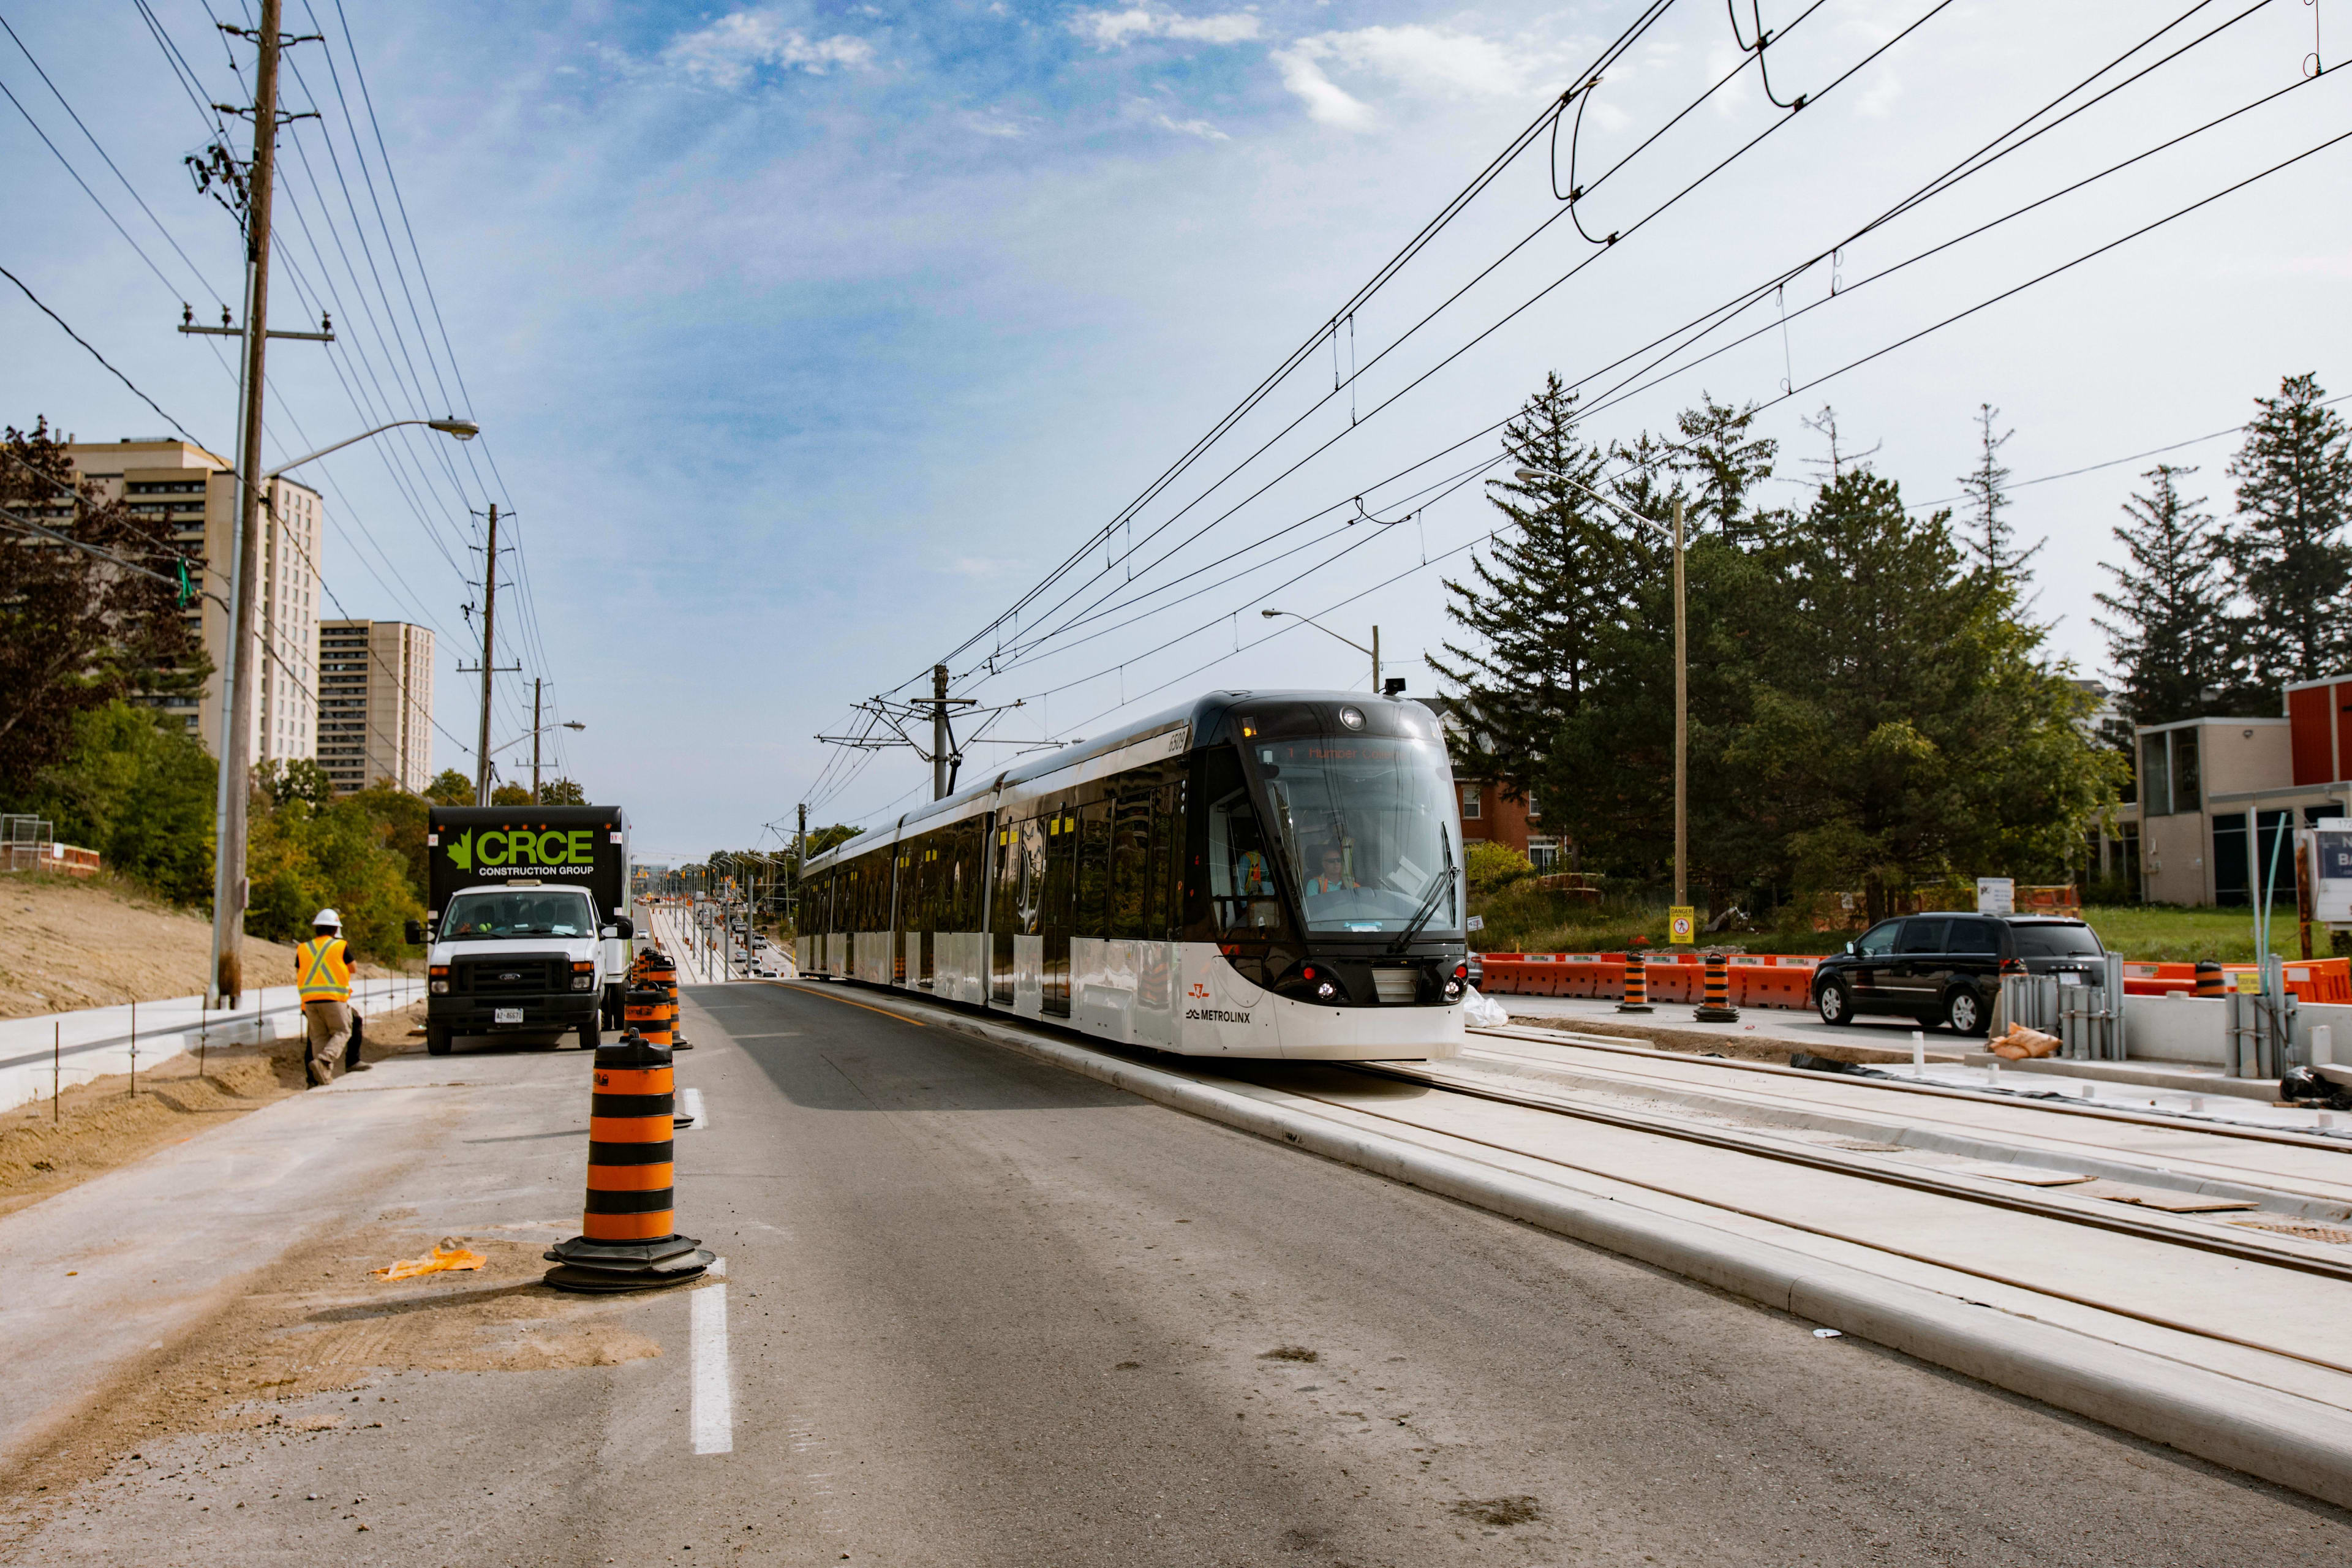 Centre-running tracks for the Finch West LRT